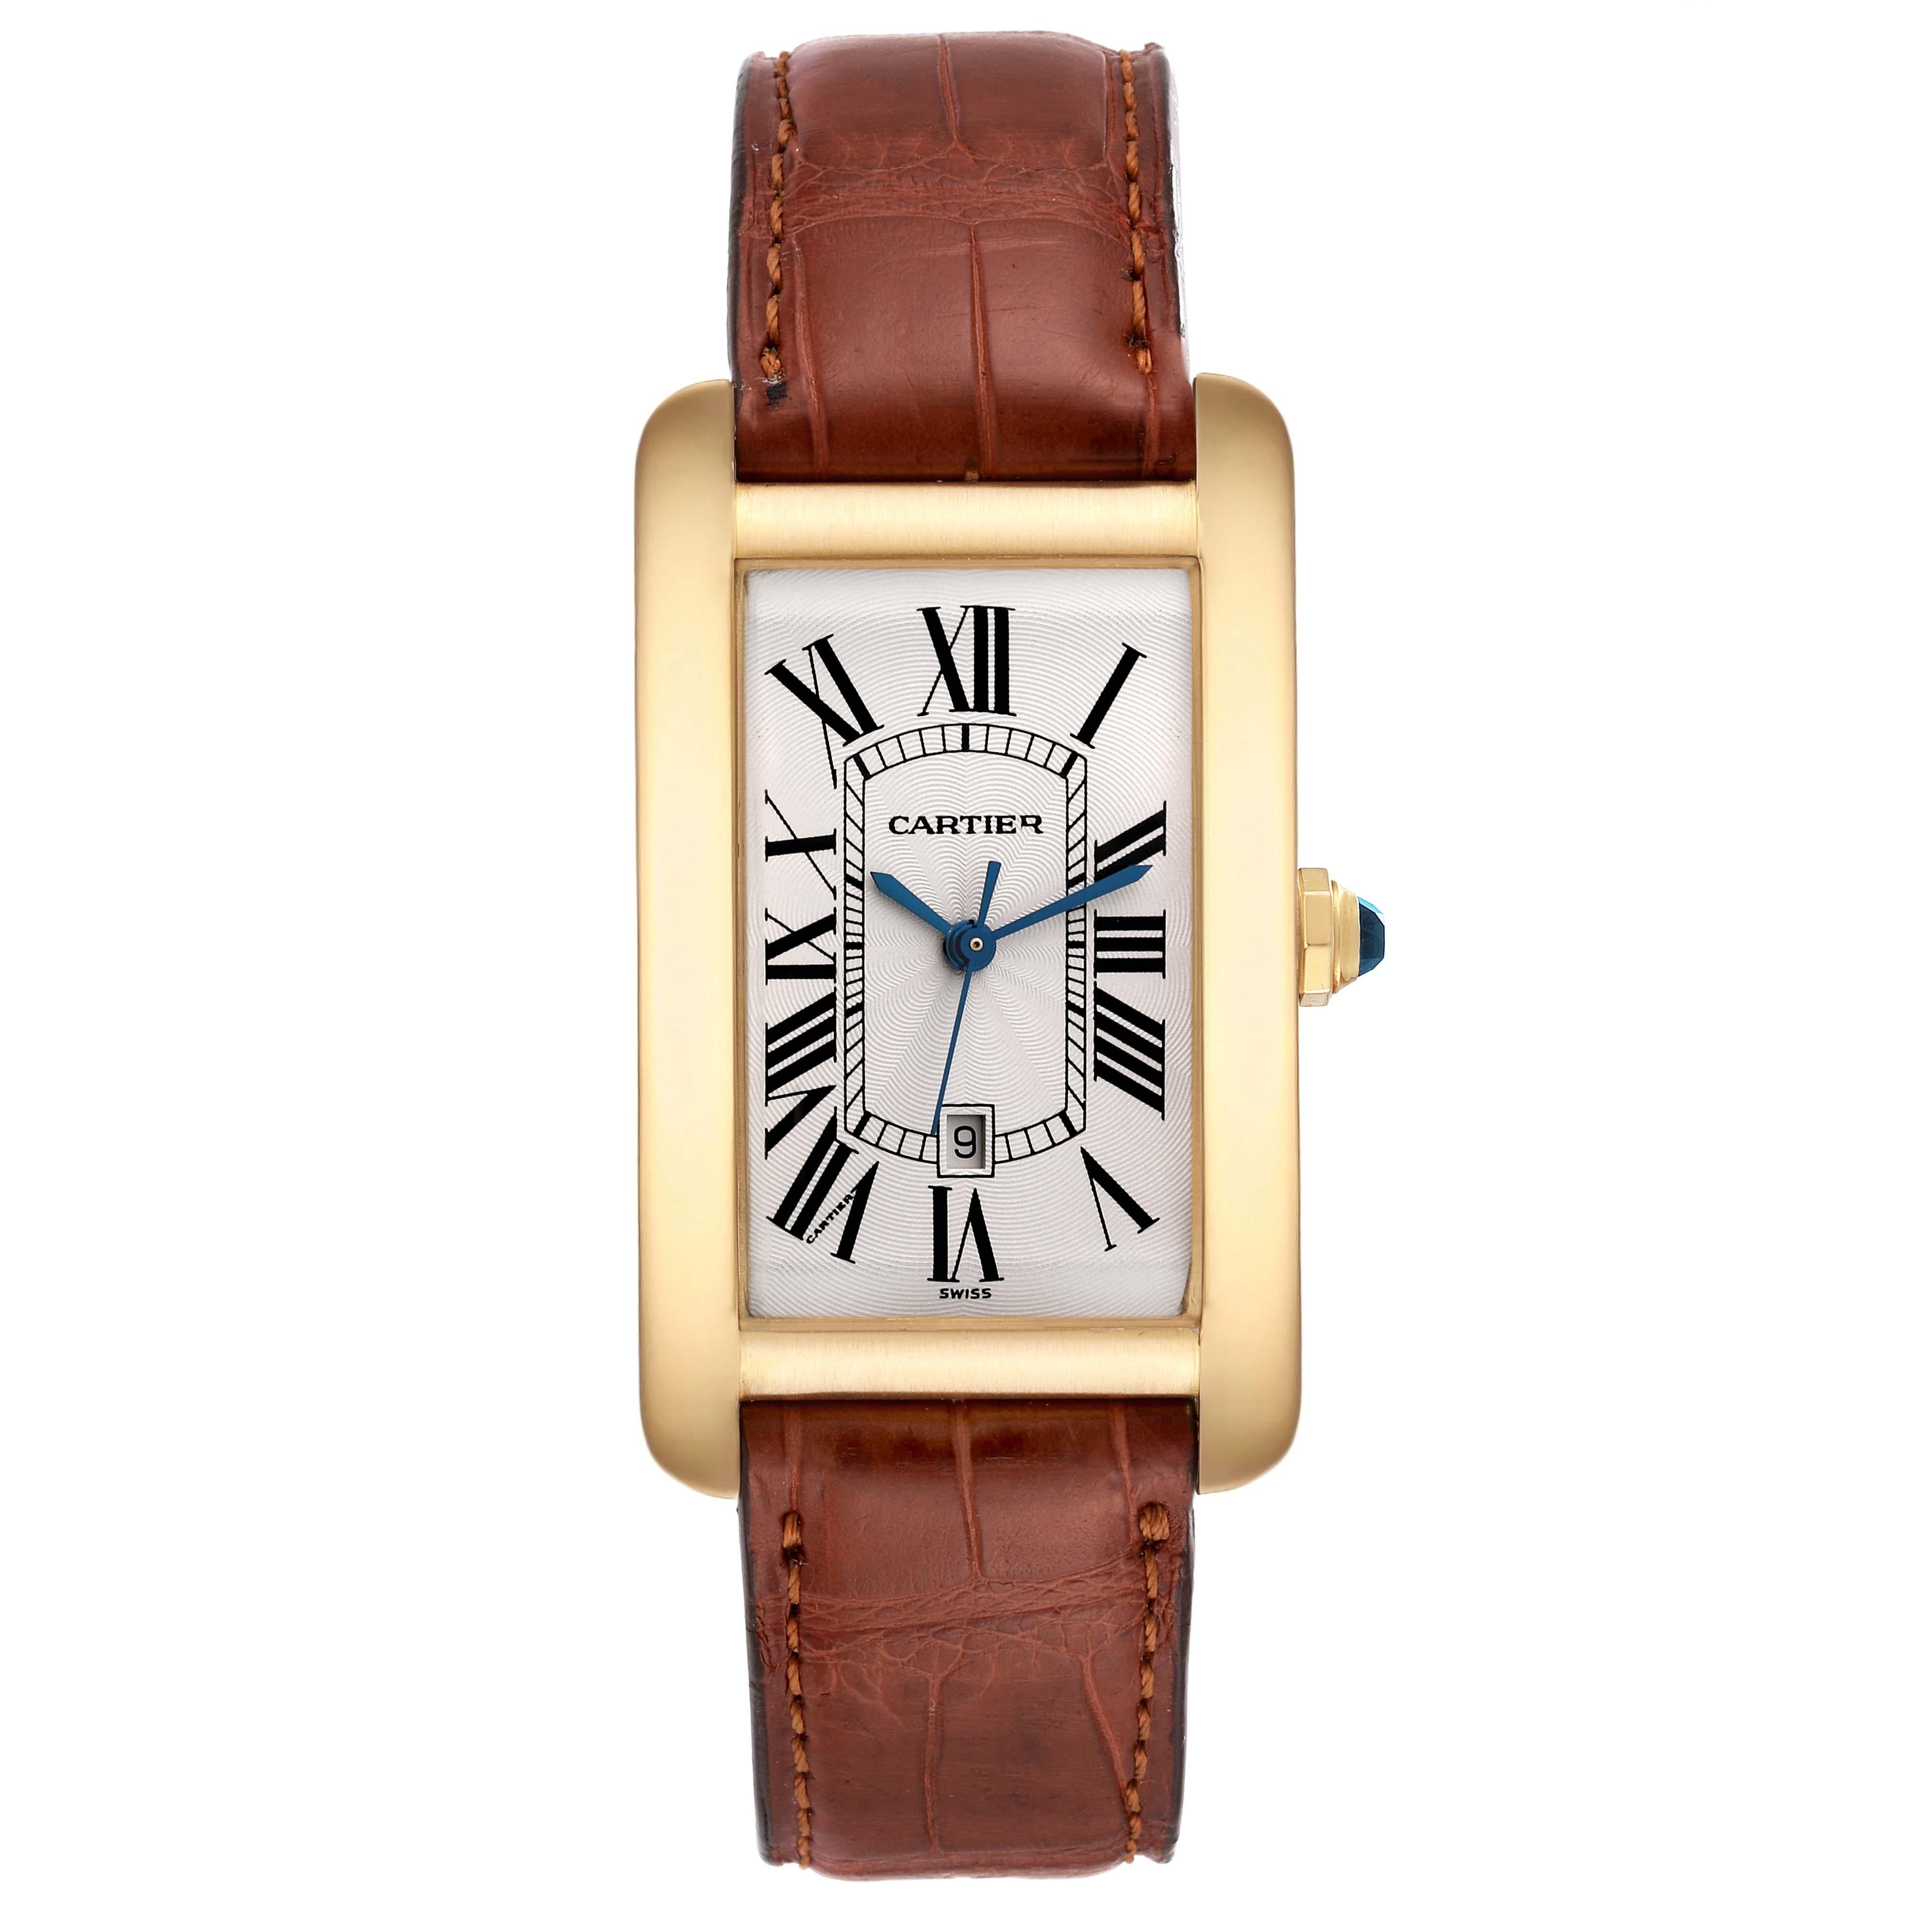 Cartier Tank Americaine Yellow Gold Automatic Mens Watch W2603156. Automatic self-winding movement. 18K yellow gold case 26.6 x 45.1 mm. Octagonal crown set with faceted blue sapphire. . Scratch resistant sapphire crystal. Silvered guilloche dial